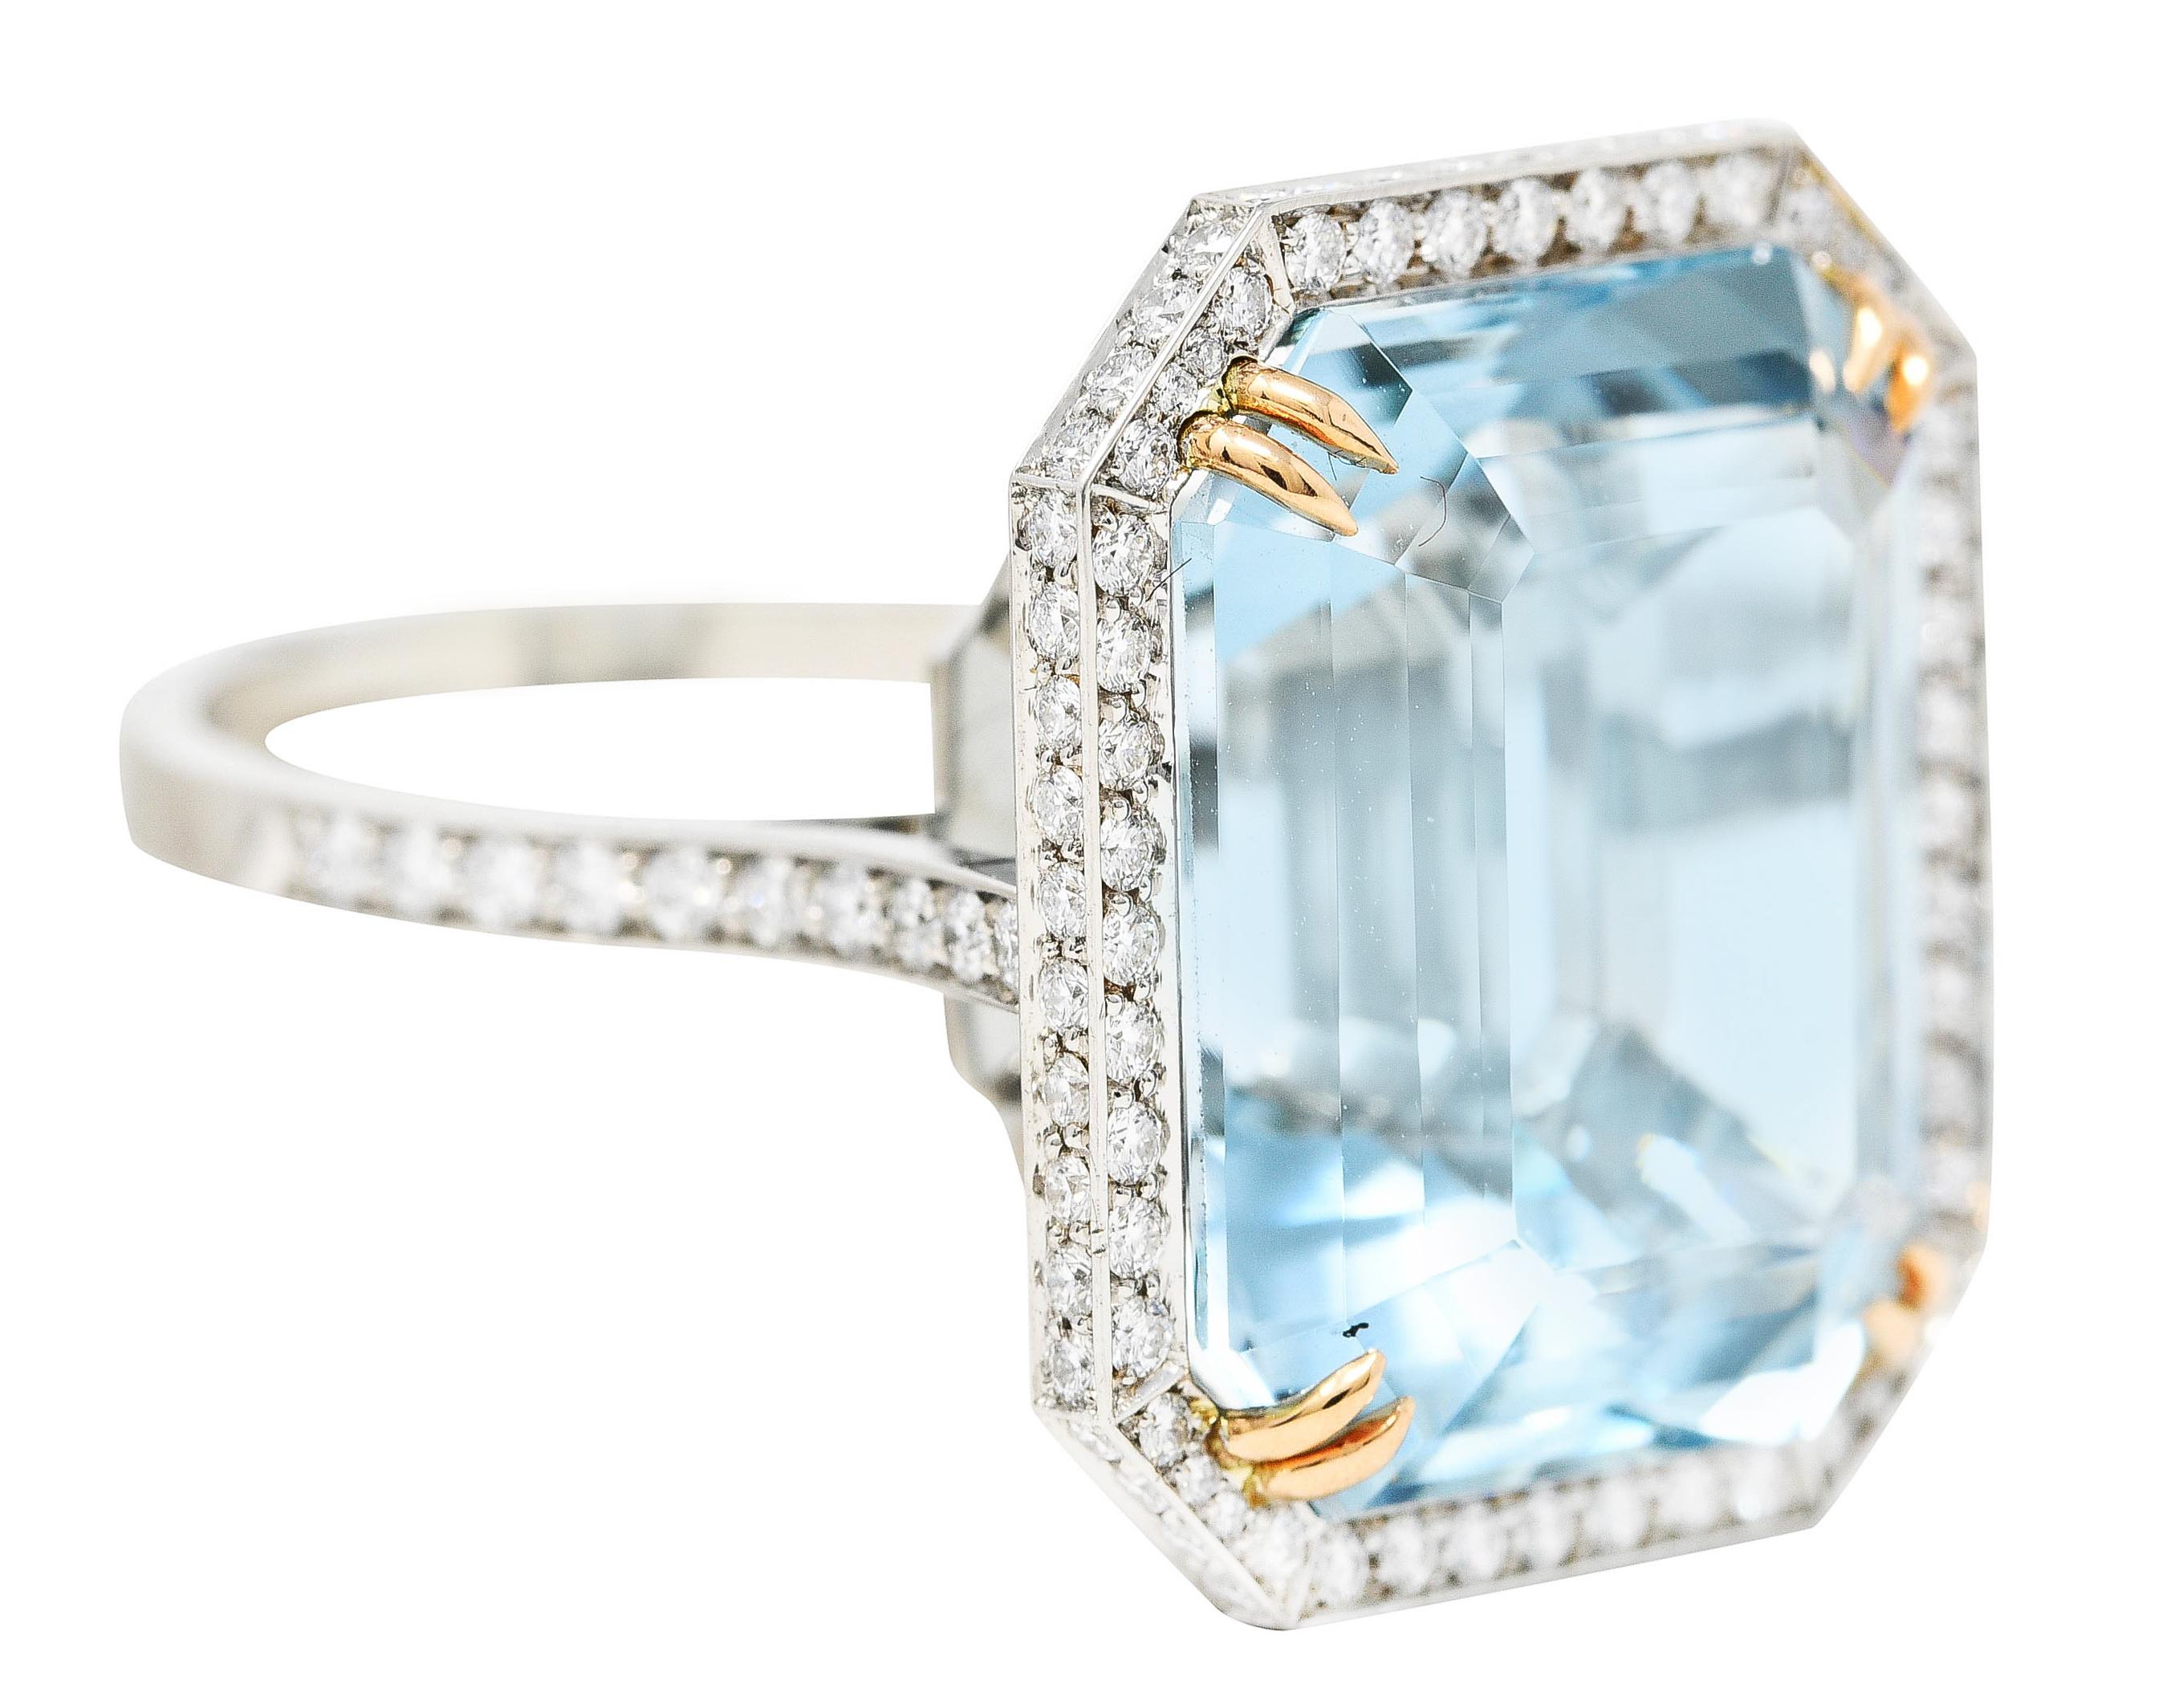 Cocktail ring features an octagonal face centering an emerald cut aquamarine with a barrel faceted crown. Transparent with medium light greenish blue color while weighing approximately 16.50 carats. Set by 18 karat yellow gold split prongs.